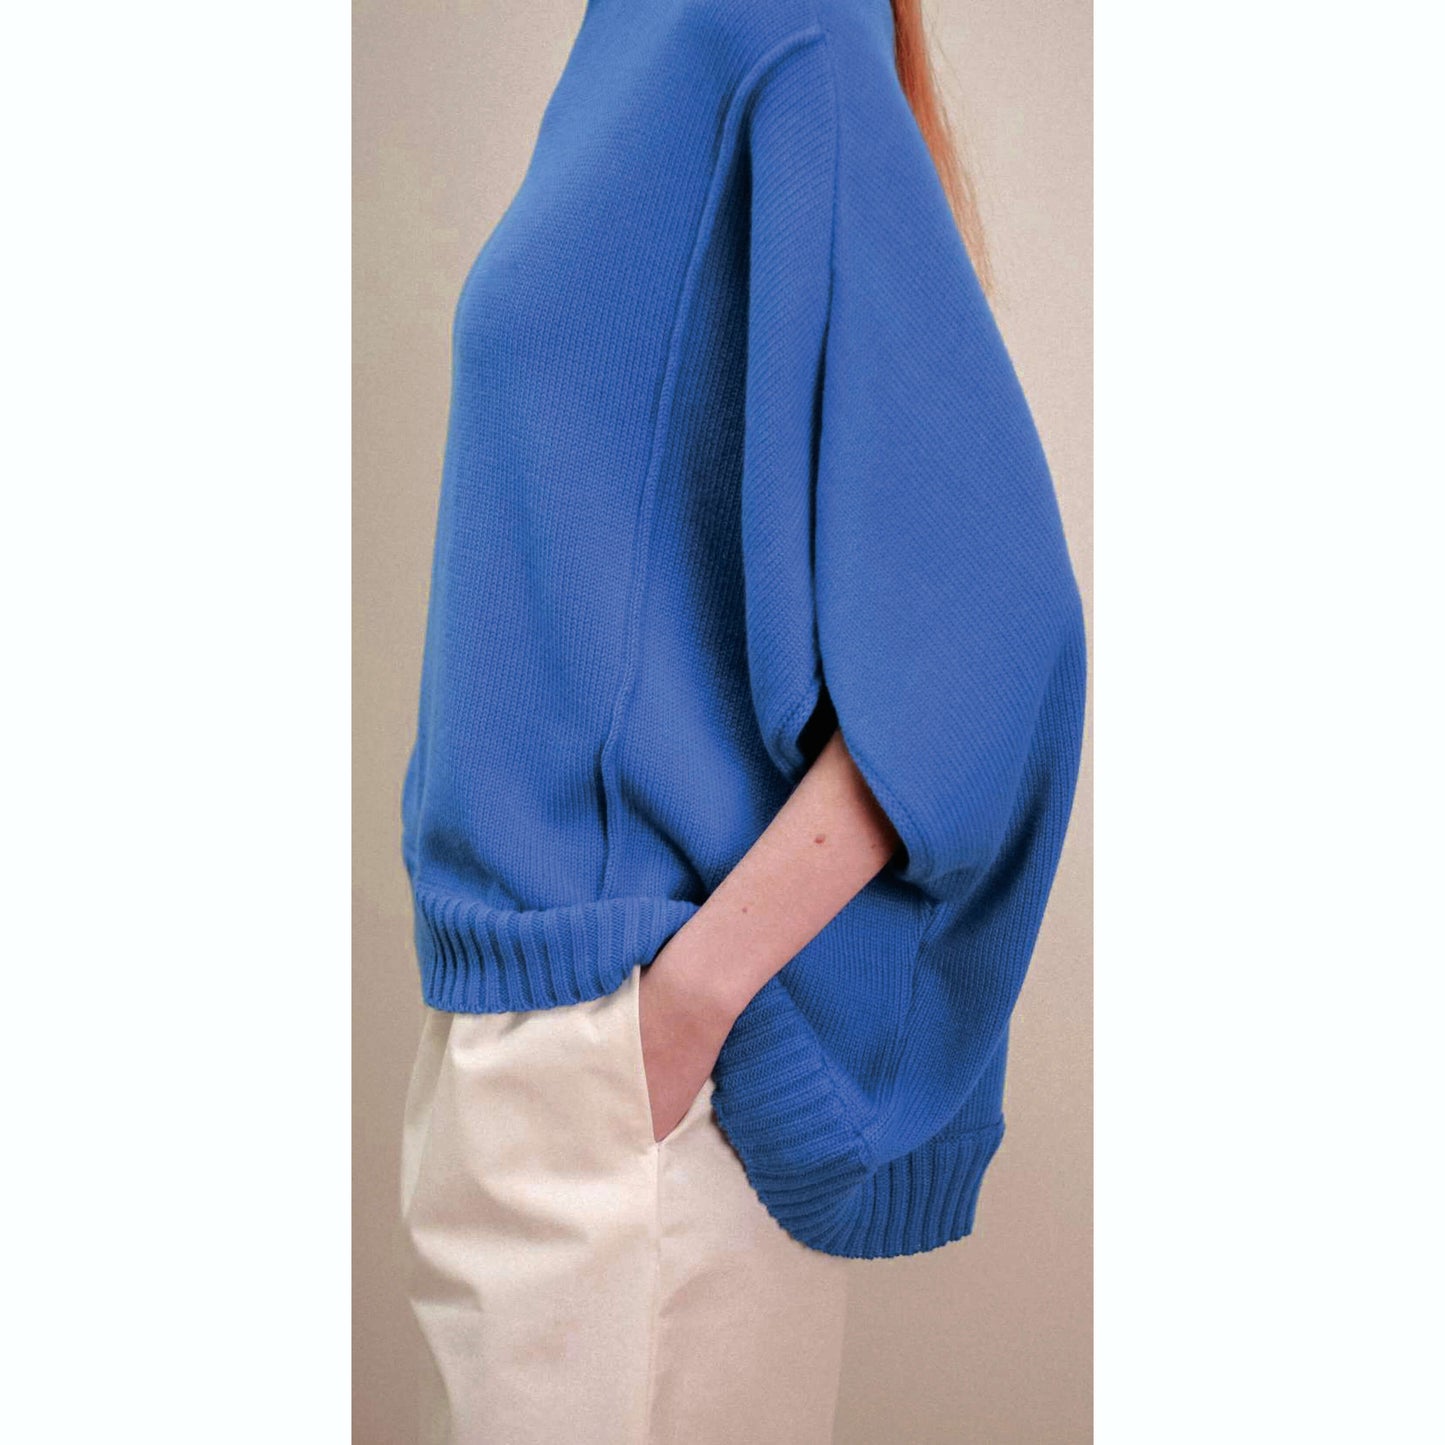 Pull oversize poncho - Outremer